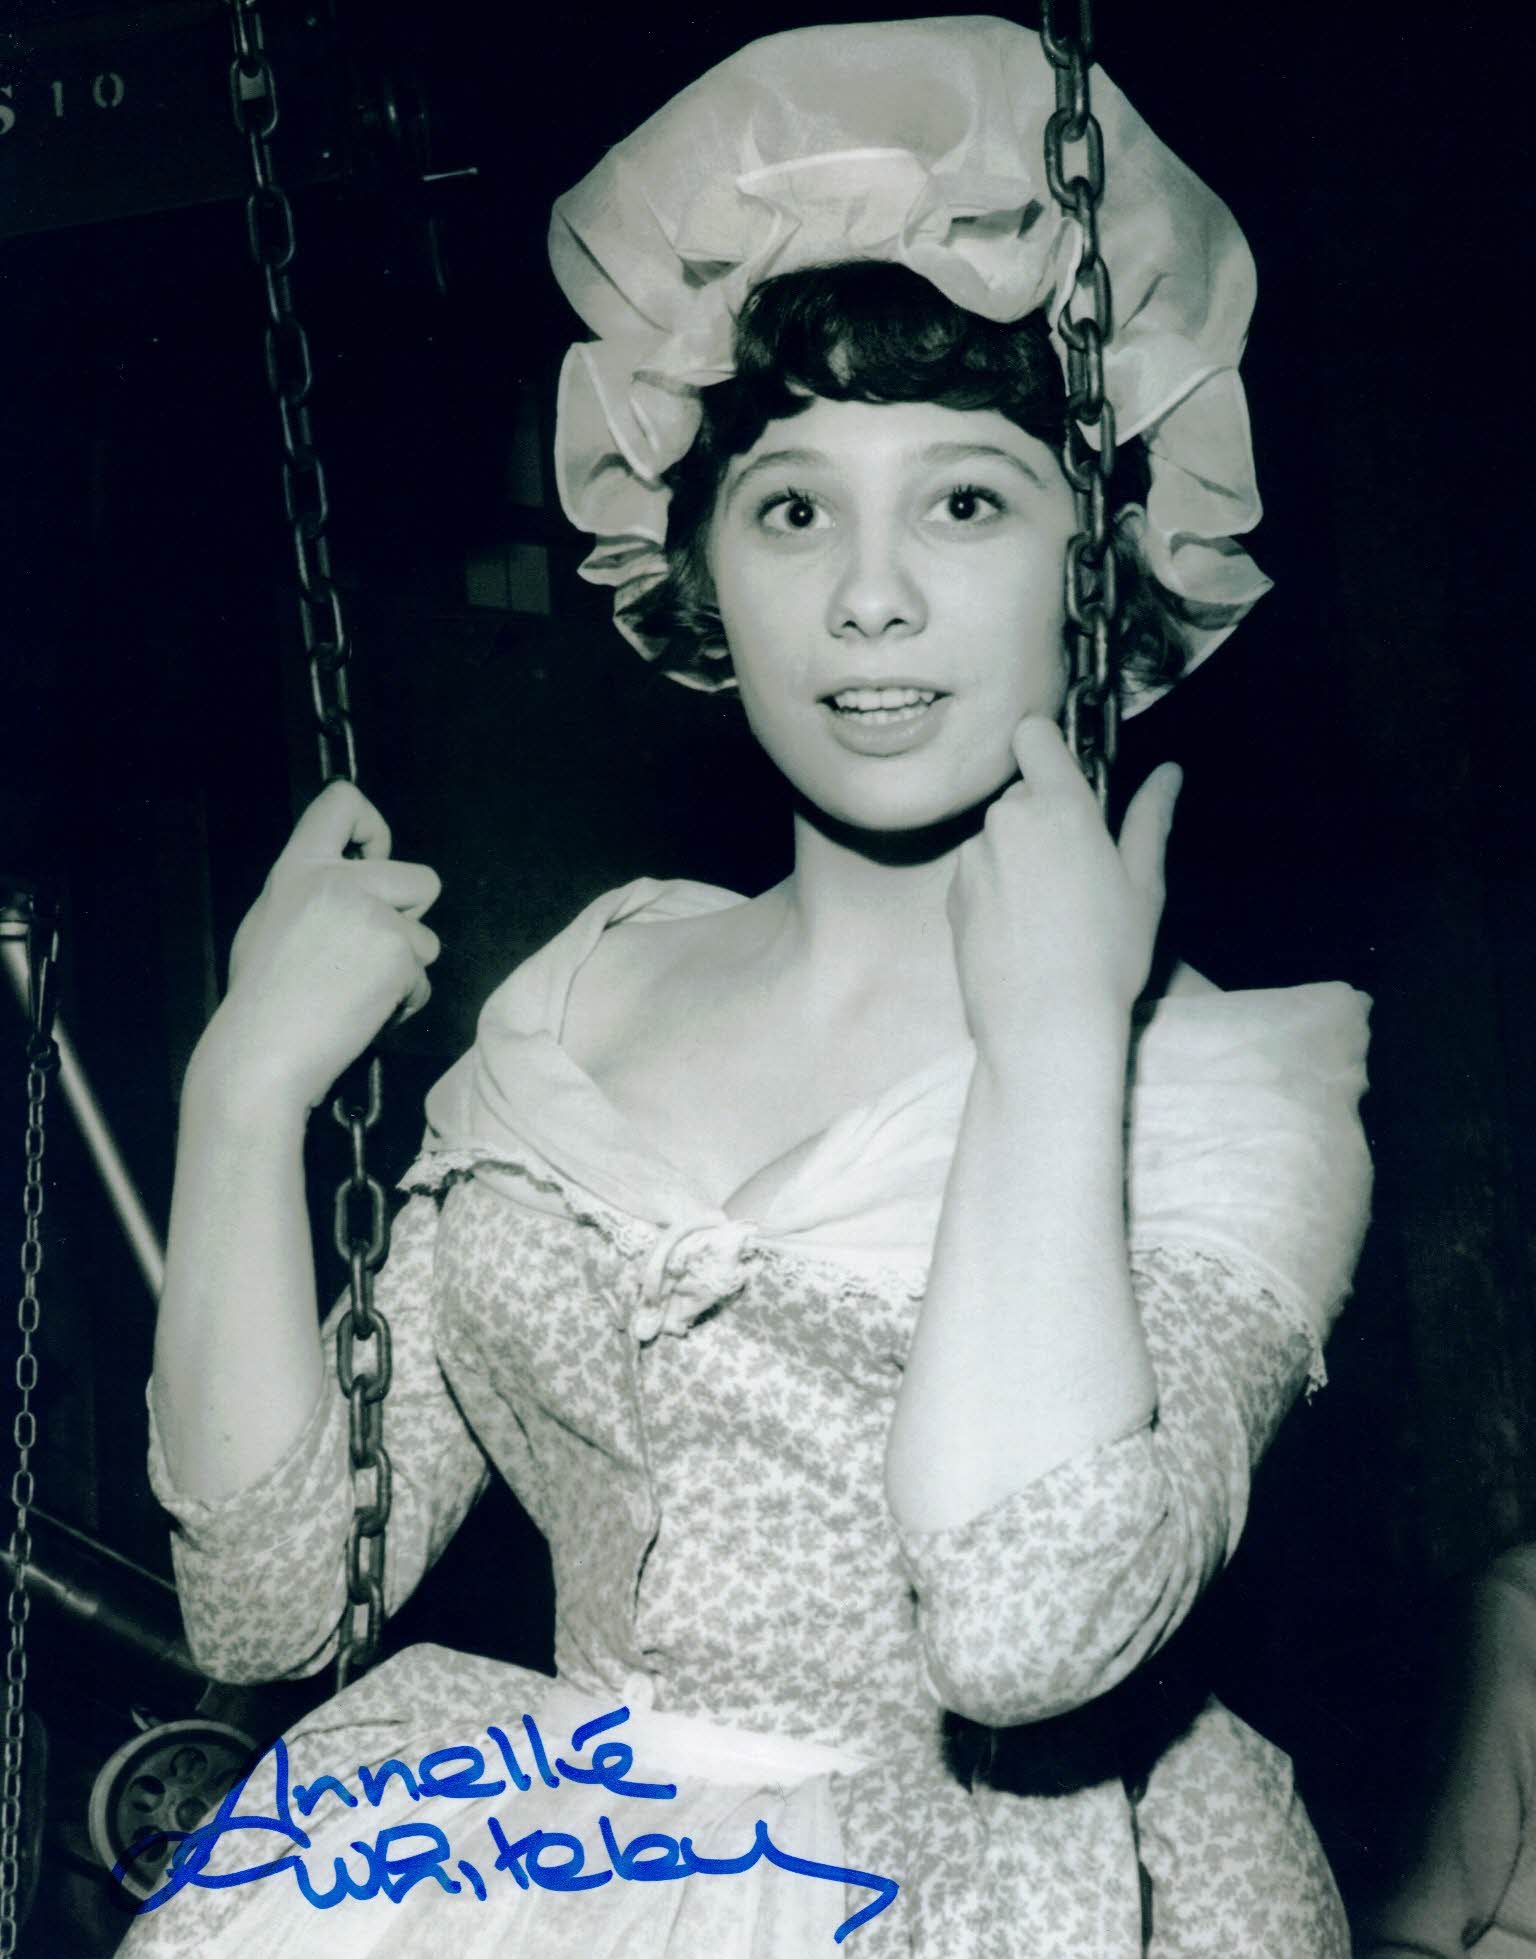 ANNETTE WHITELEY - Mary in The Black Torment-   hand signed 10 x 8 photo